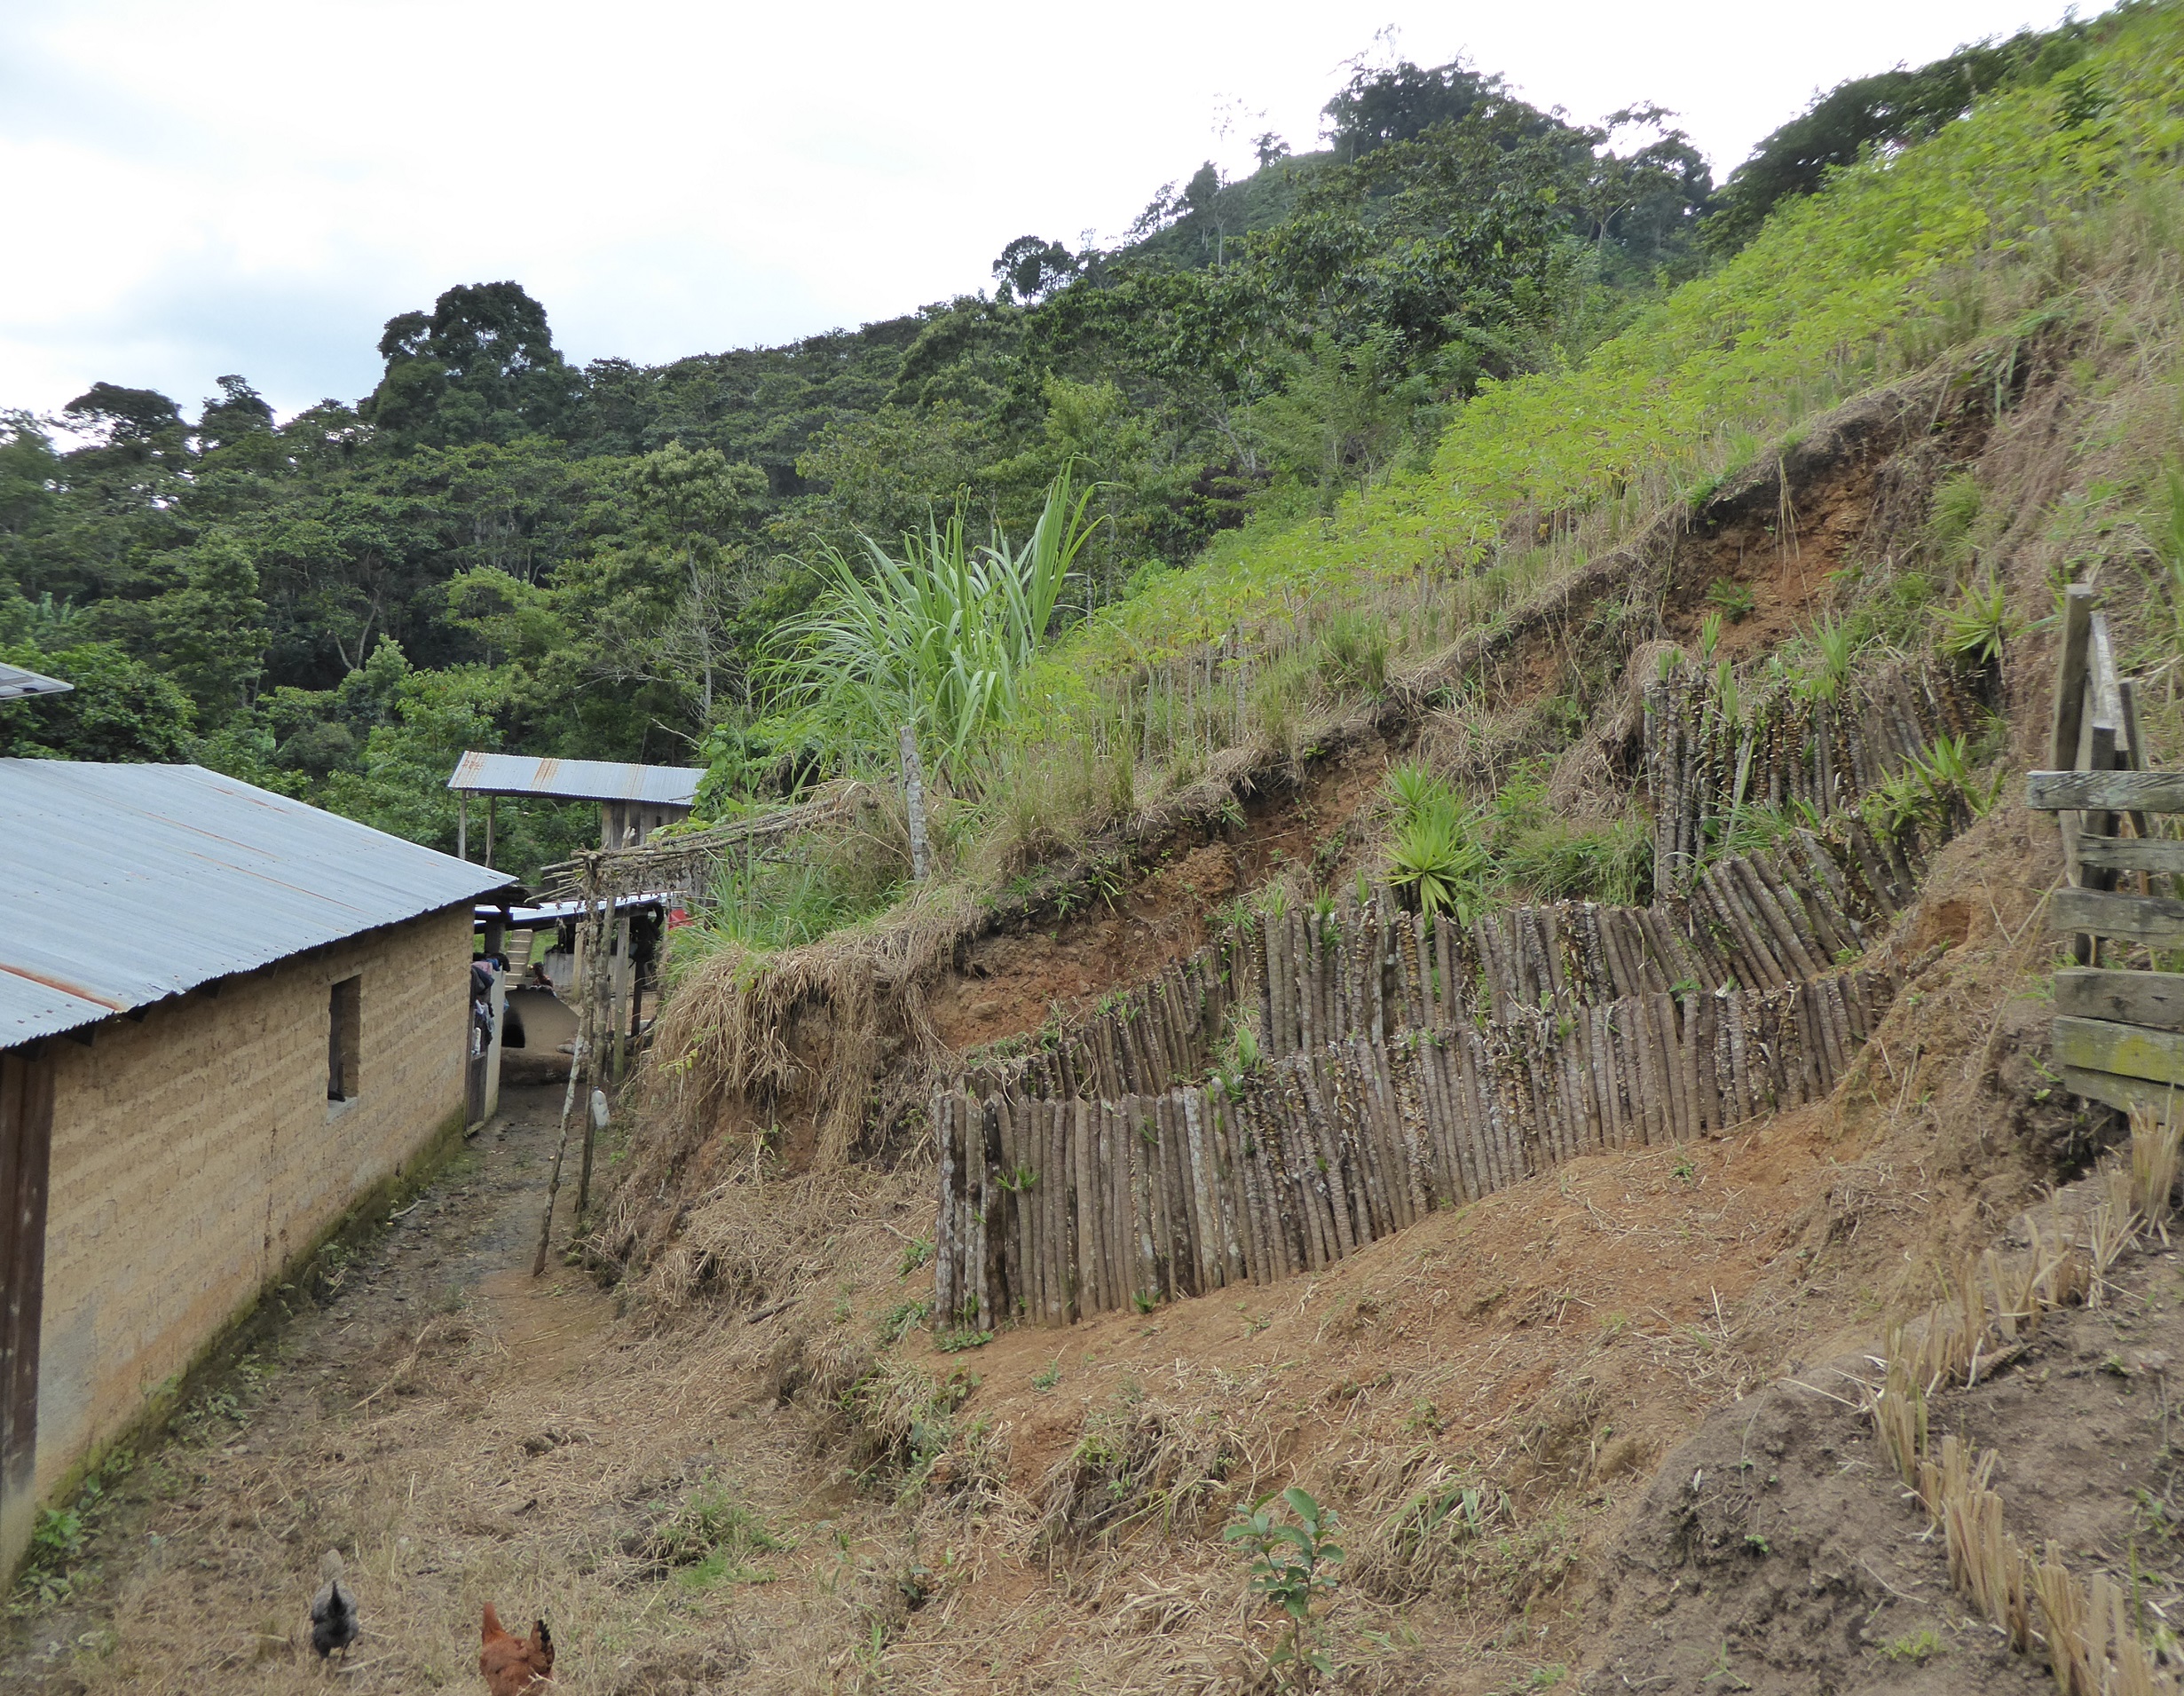 A V-shaped catchment fence using izote (Yucca sp.) plants to prevent gully erosion and protect a nearby house .